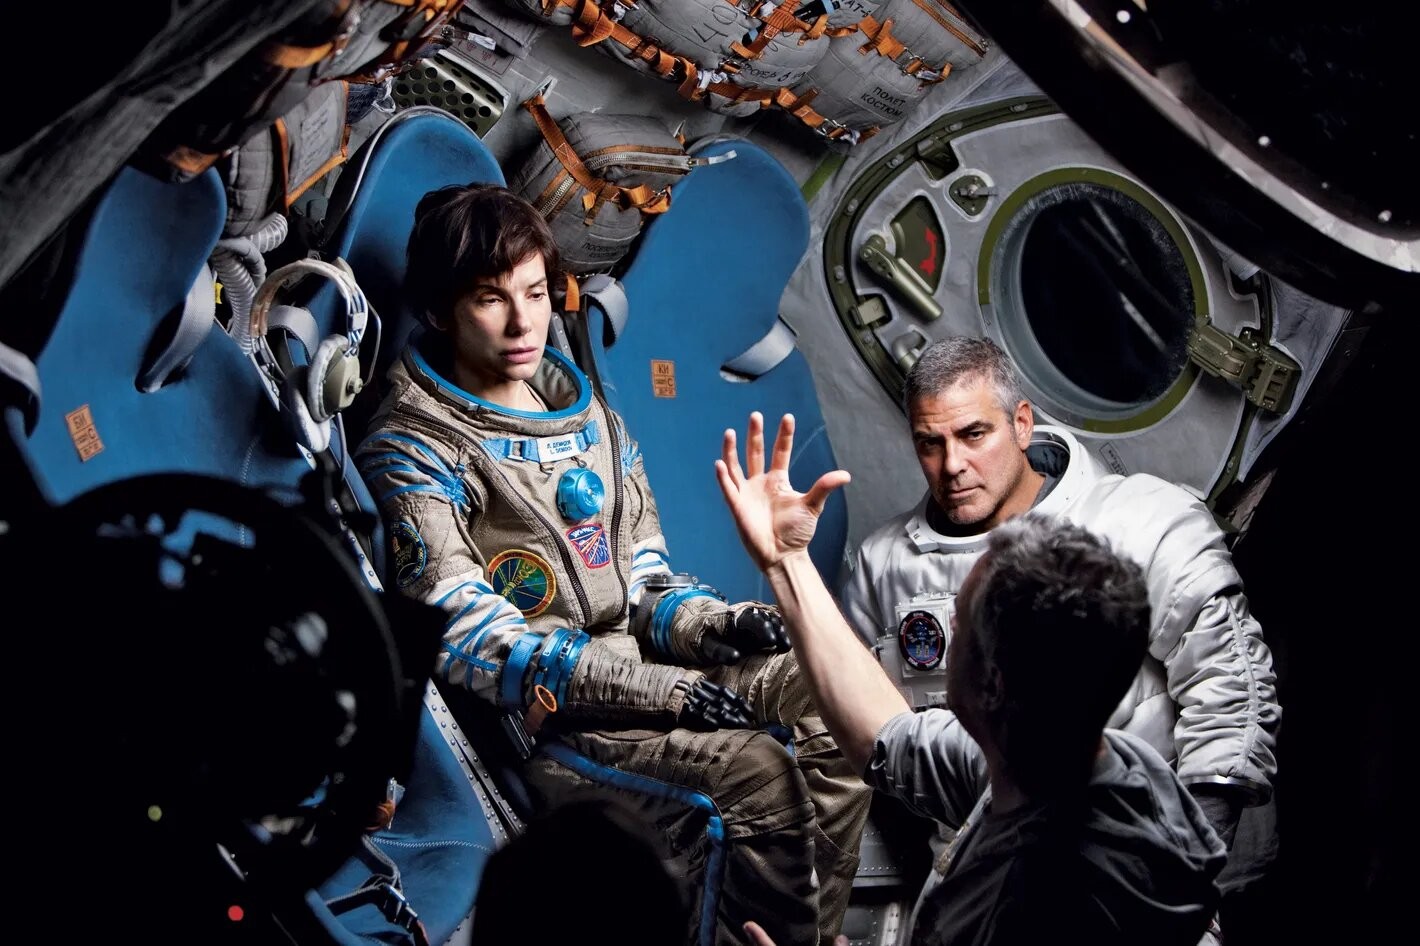 Sandra Bullock and George Clooney on the set of Gravity